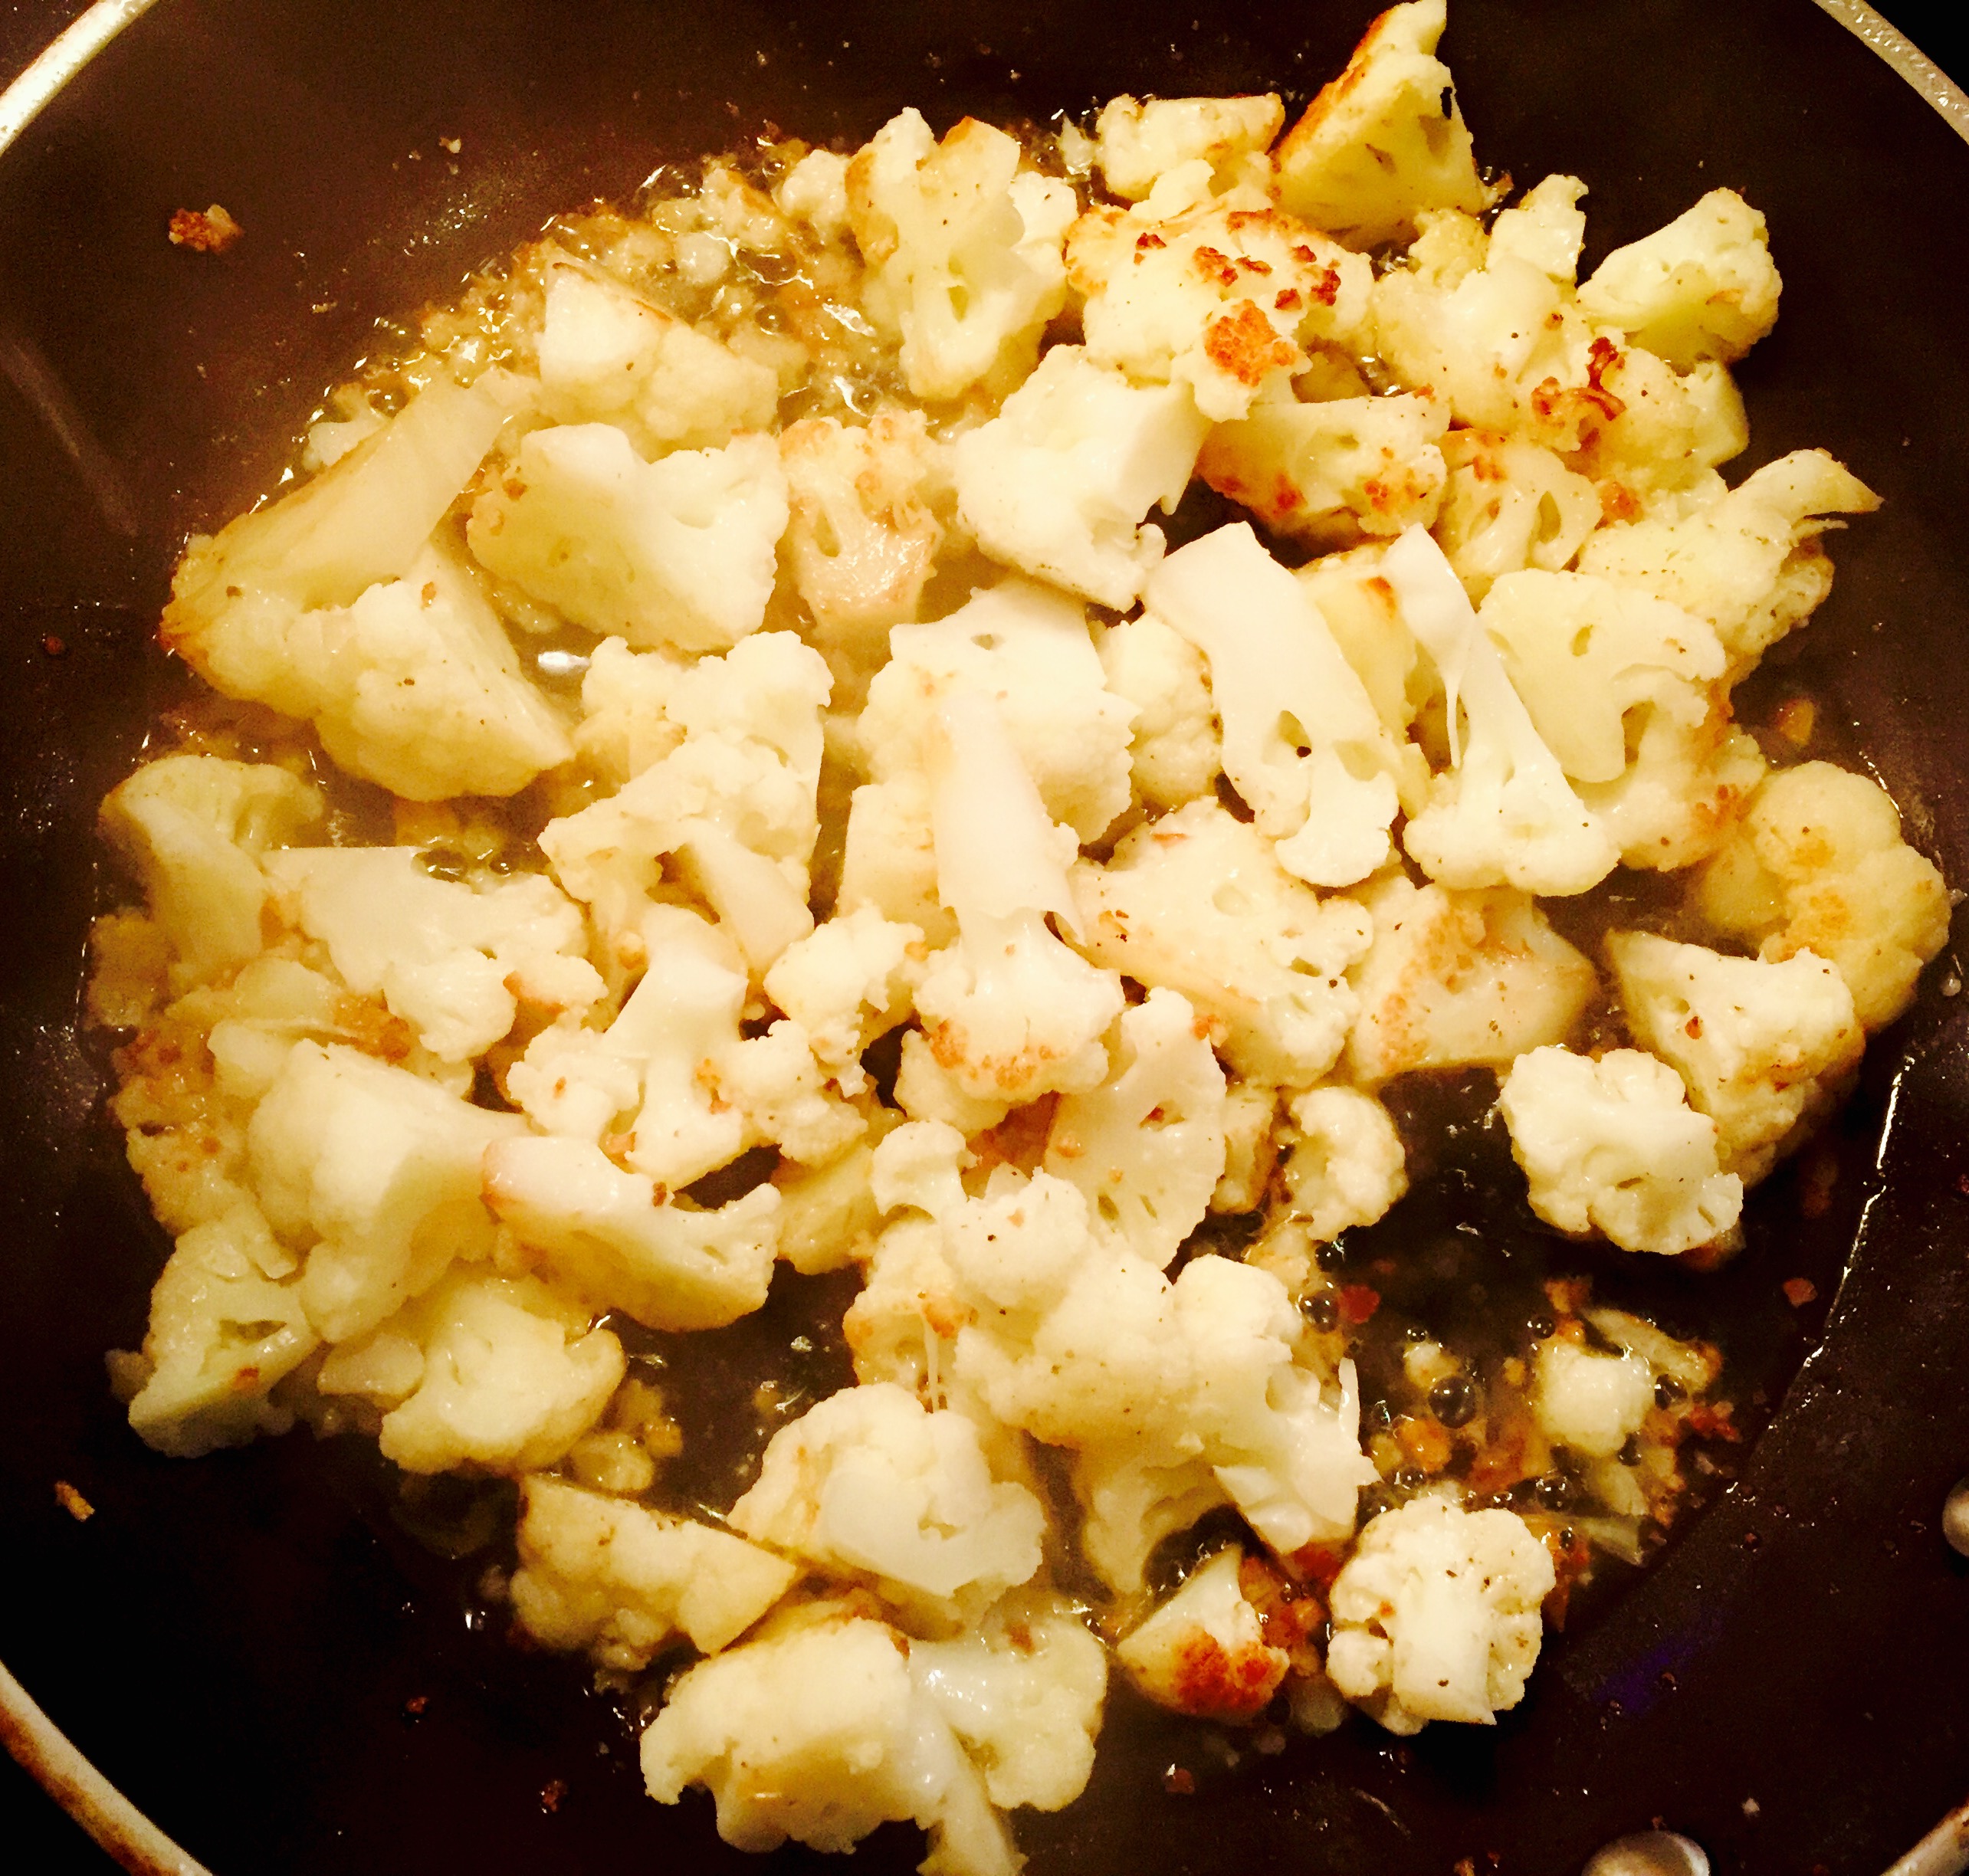 Cauliflower florets sautéing to perfection and almost ready for some white wine